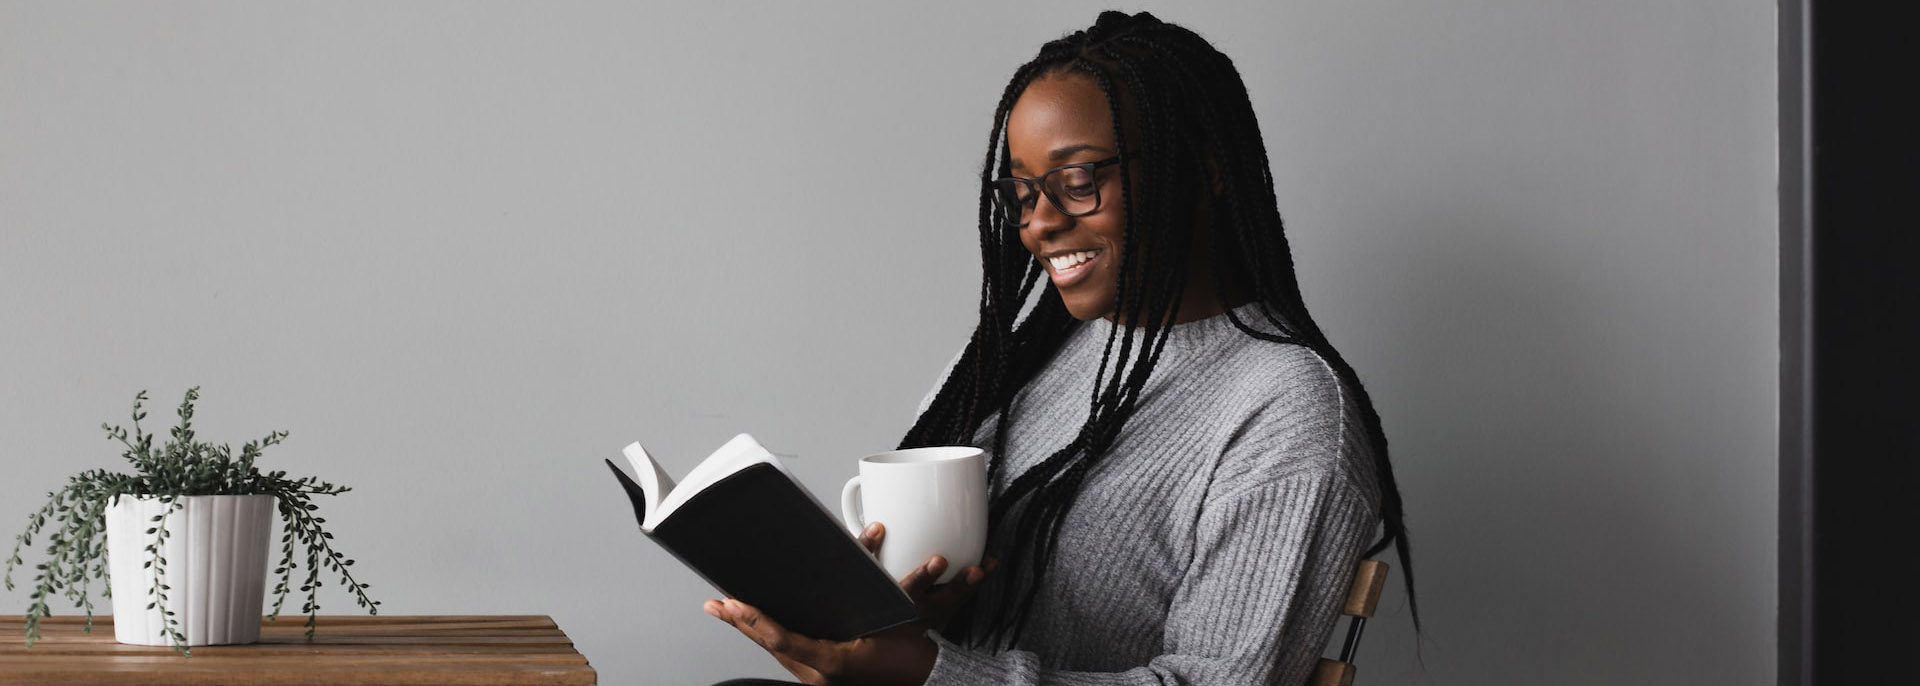 Woman smiling with coffee and book in hand